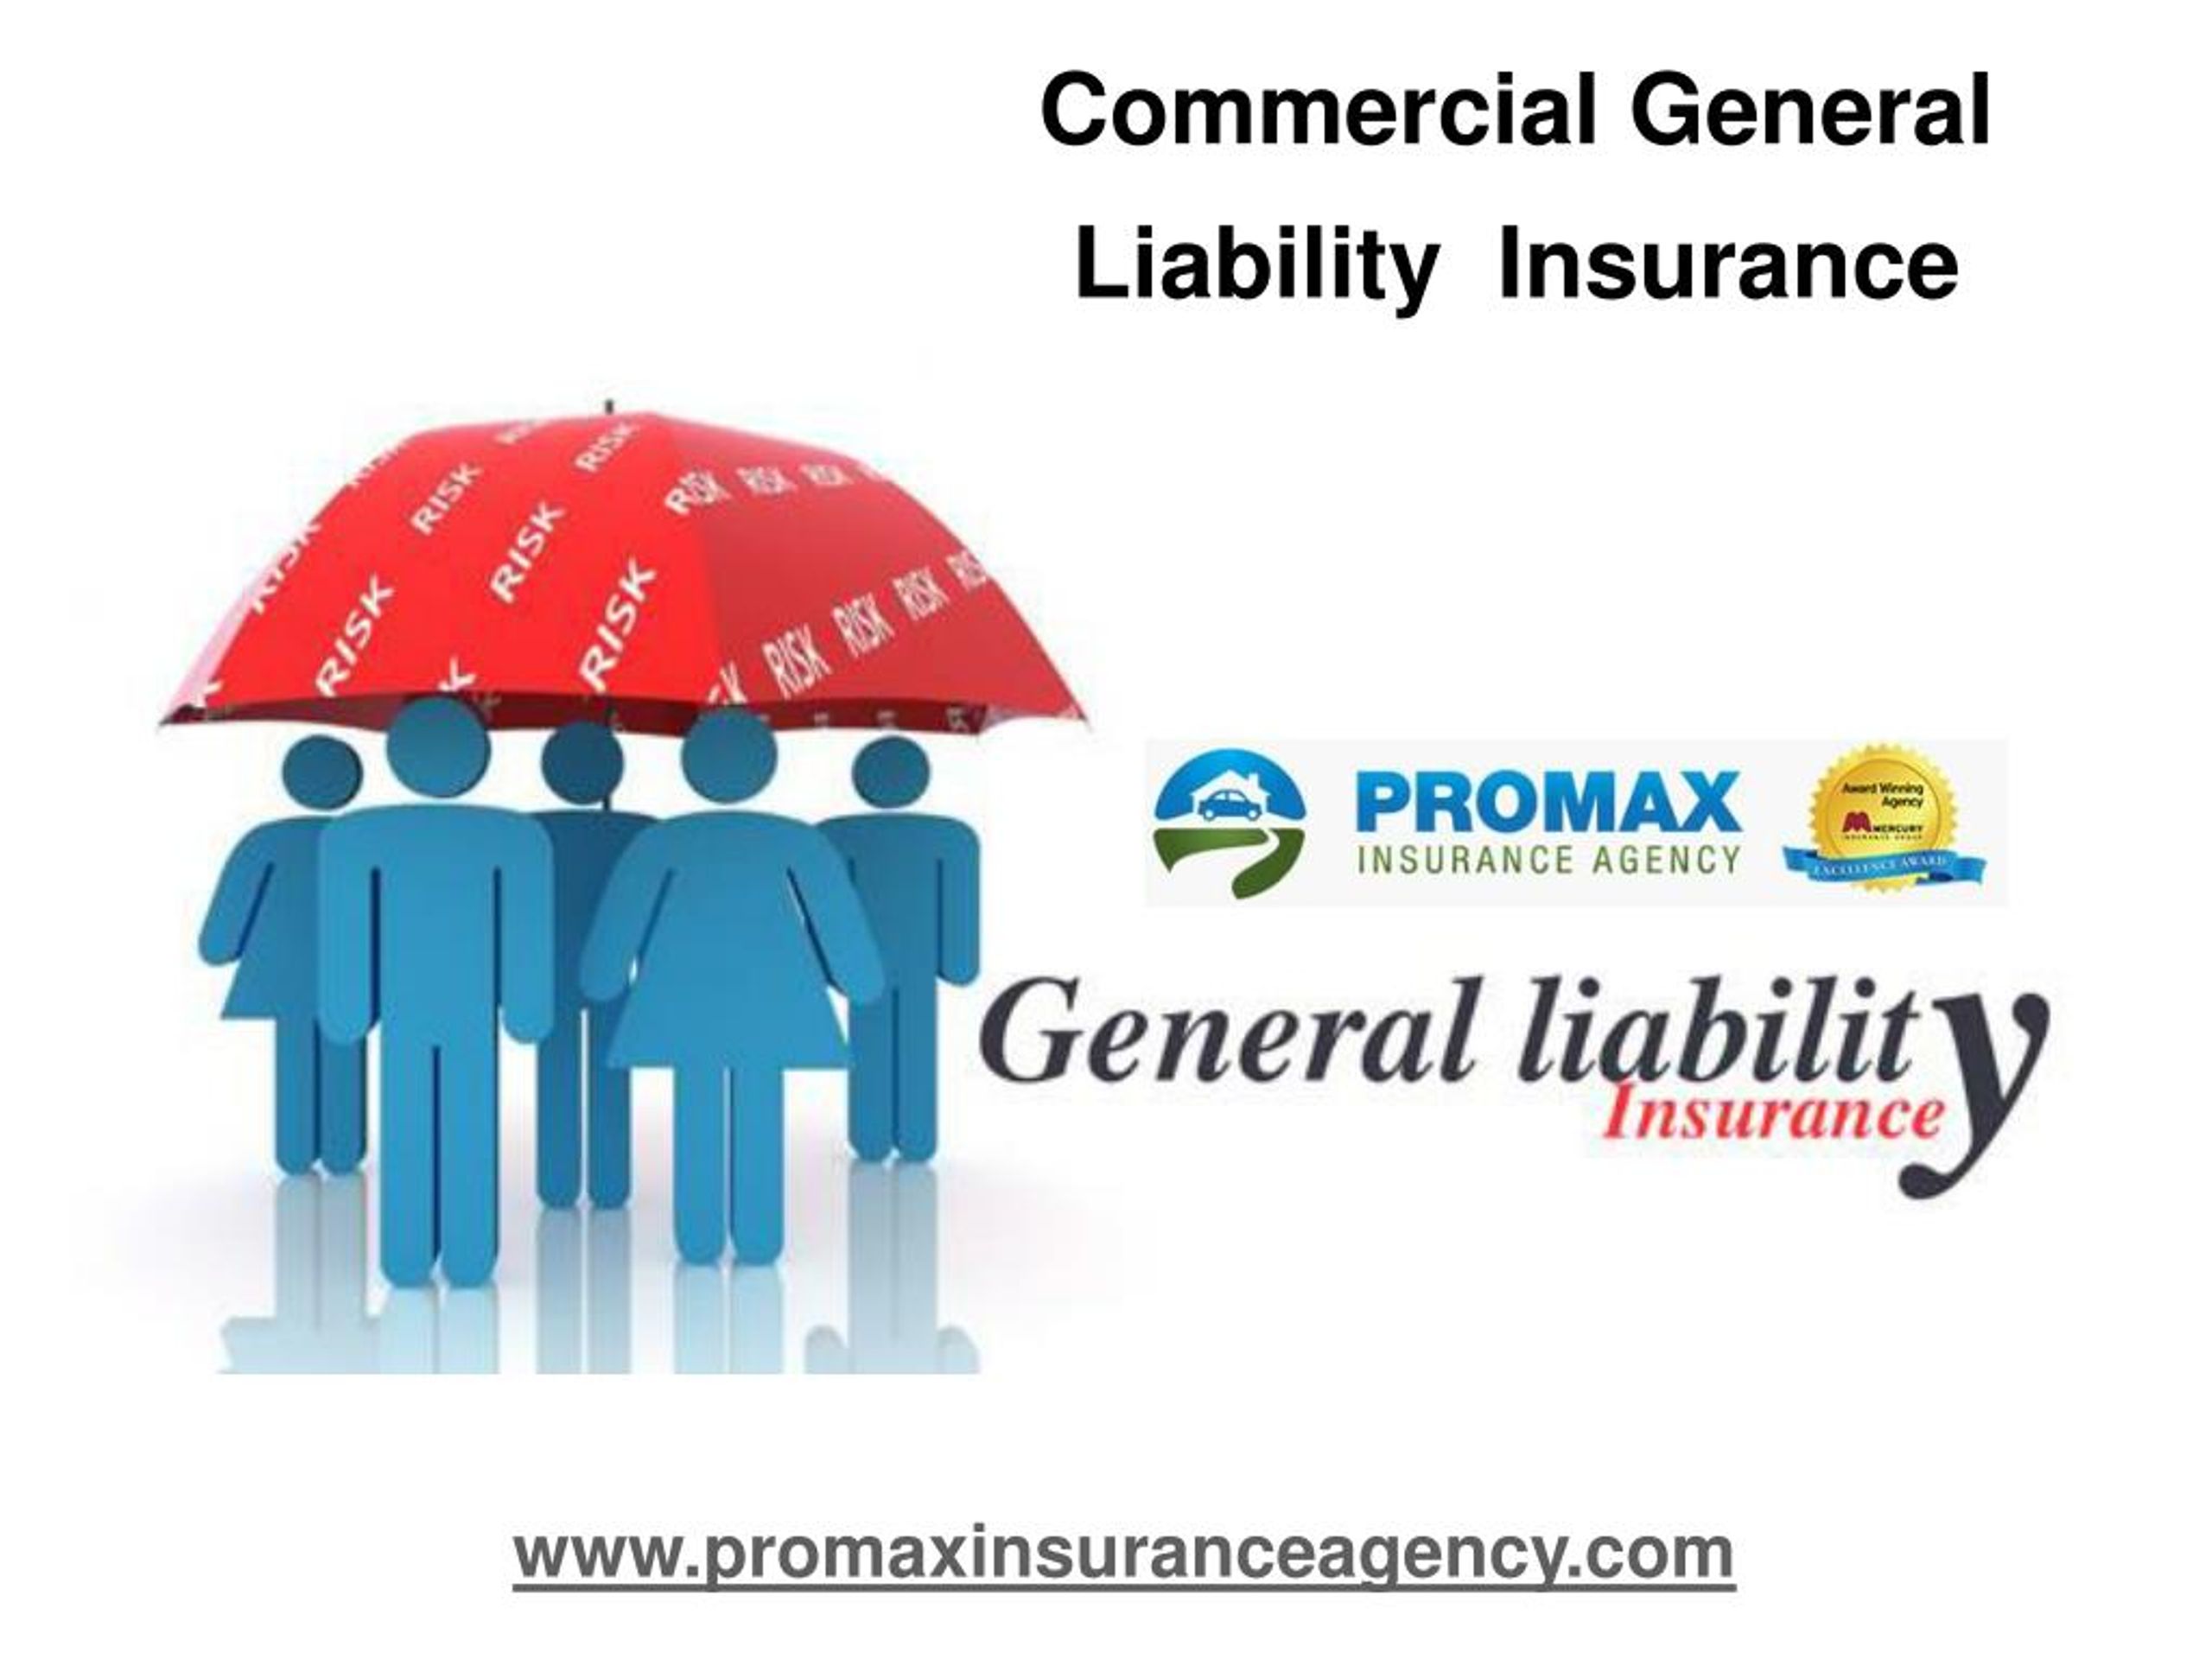 PPT Commercial General Liability Insurance in CA